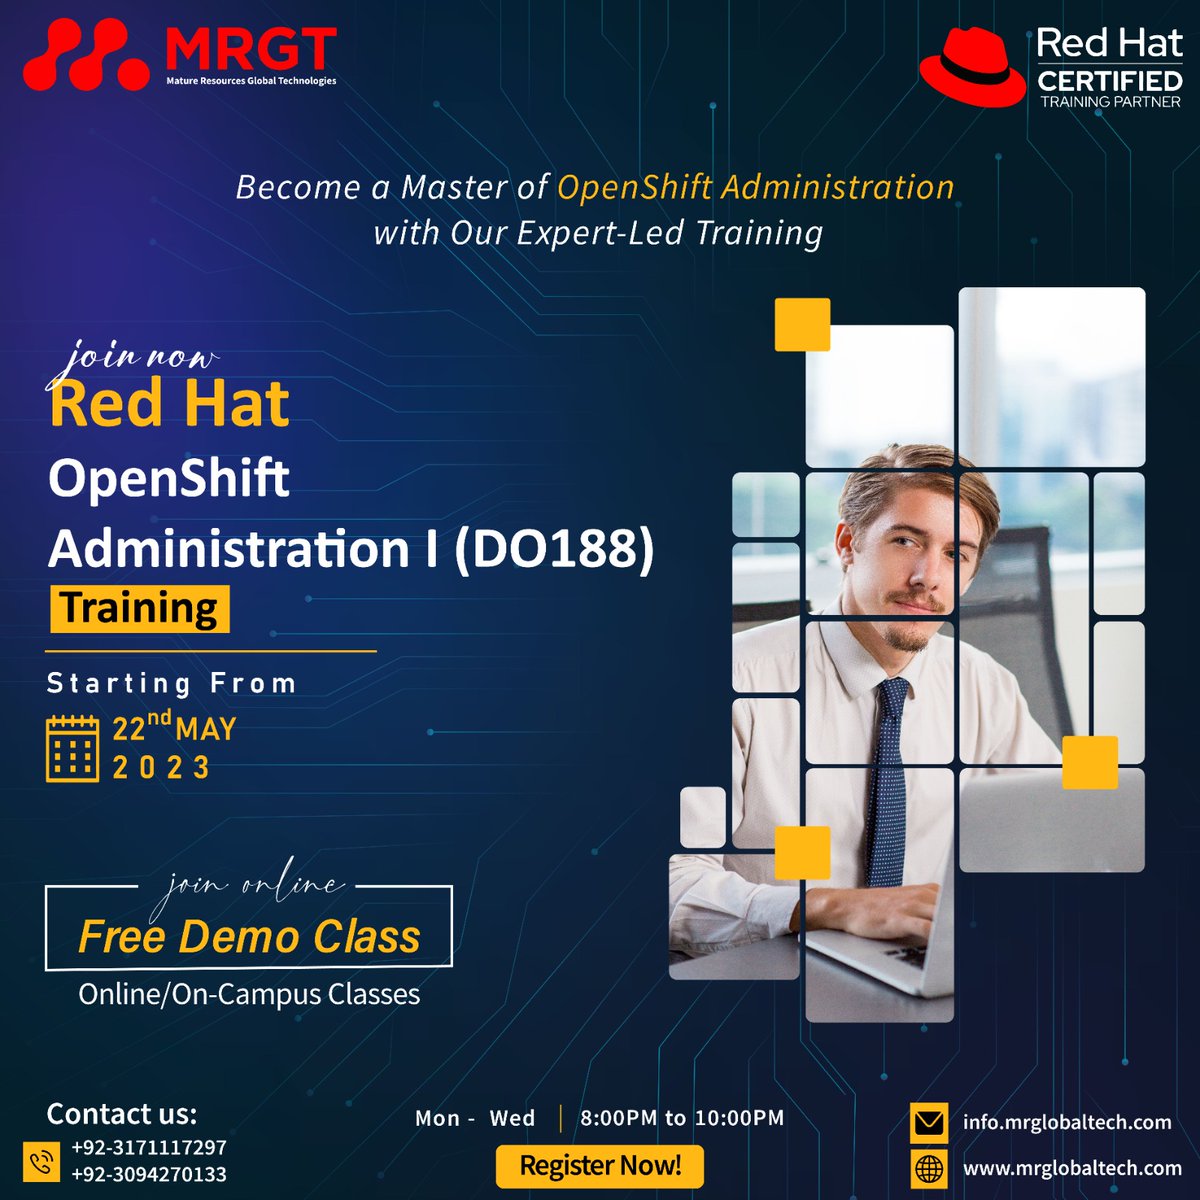 Announcing MRGT Red Hat OpenShift Administration I (DO188) Training

Click the link to Register for this Training
us06web.zoom.us/meeting/regist…

#Mrgt #training #redhat #redhatlinux #redhatopenshift #RedhatCertification #redhattraining #RedHatpartner #automation #OpenShift #do188